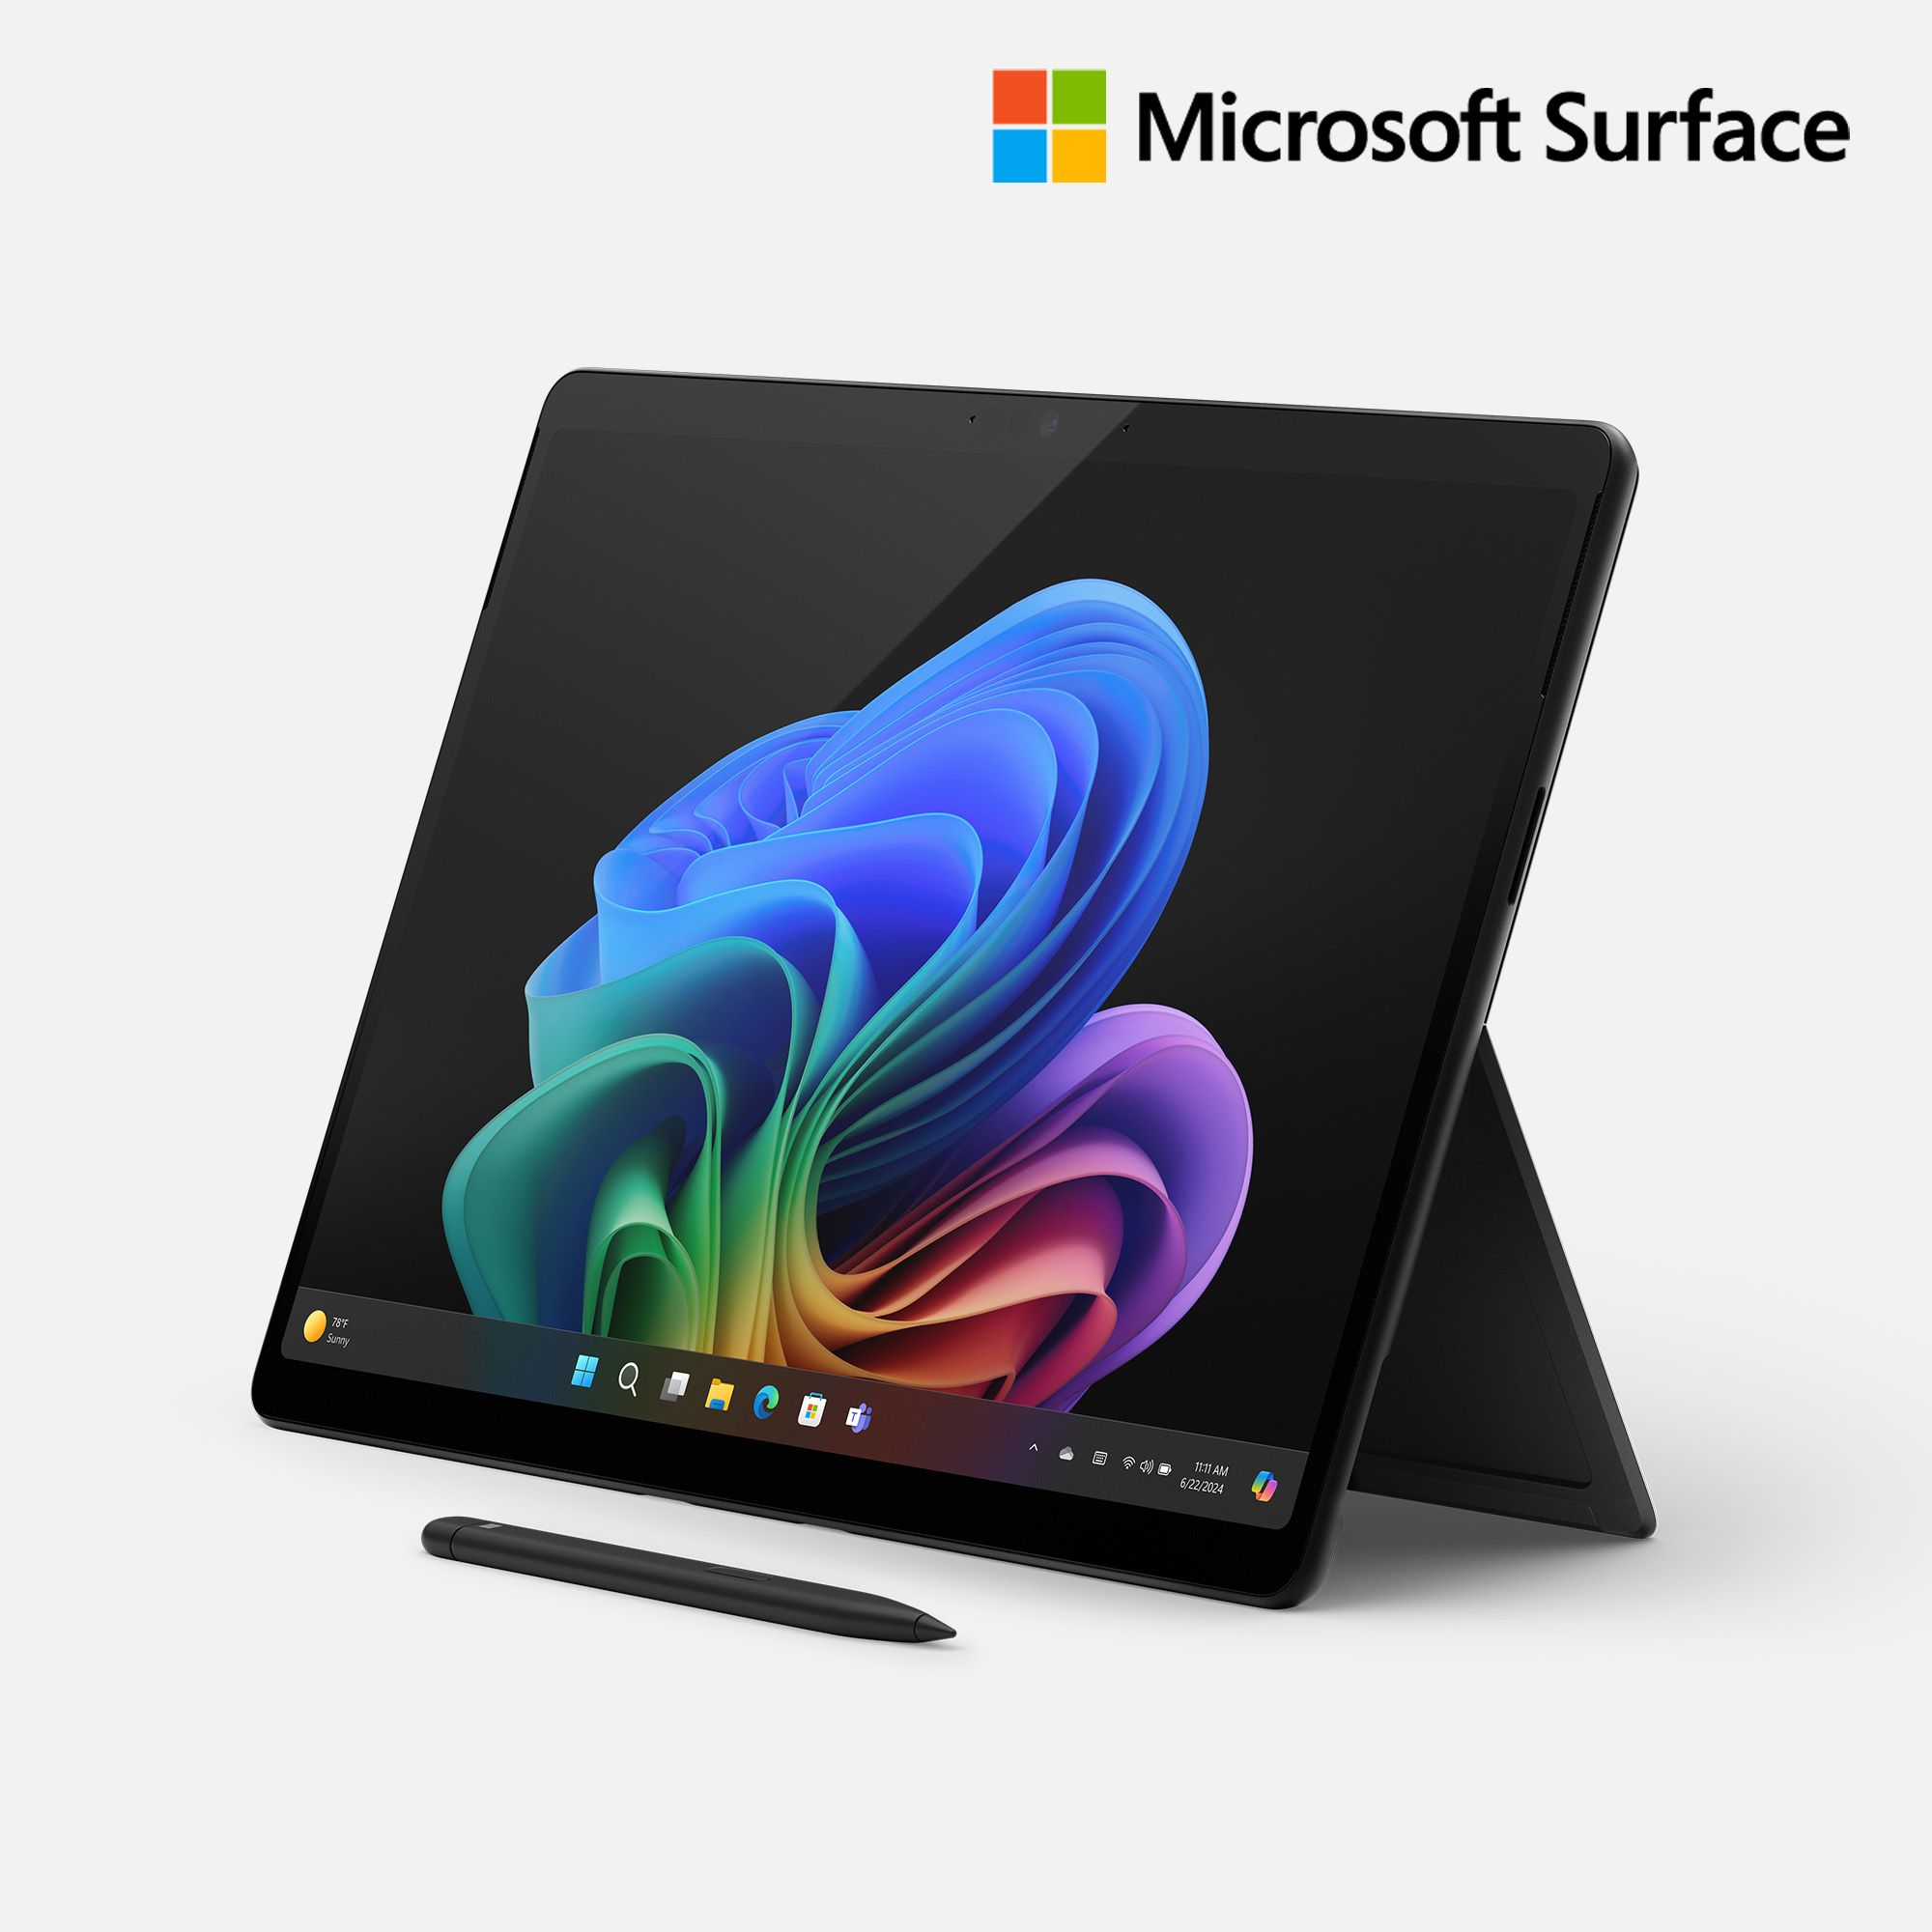 Microsoft surface on a white background